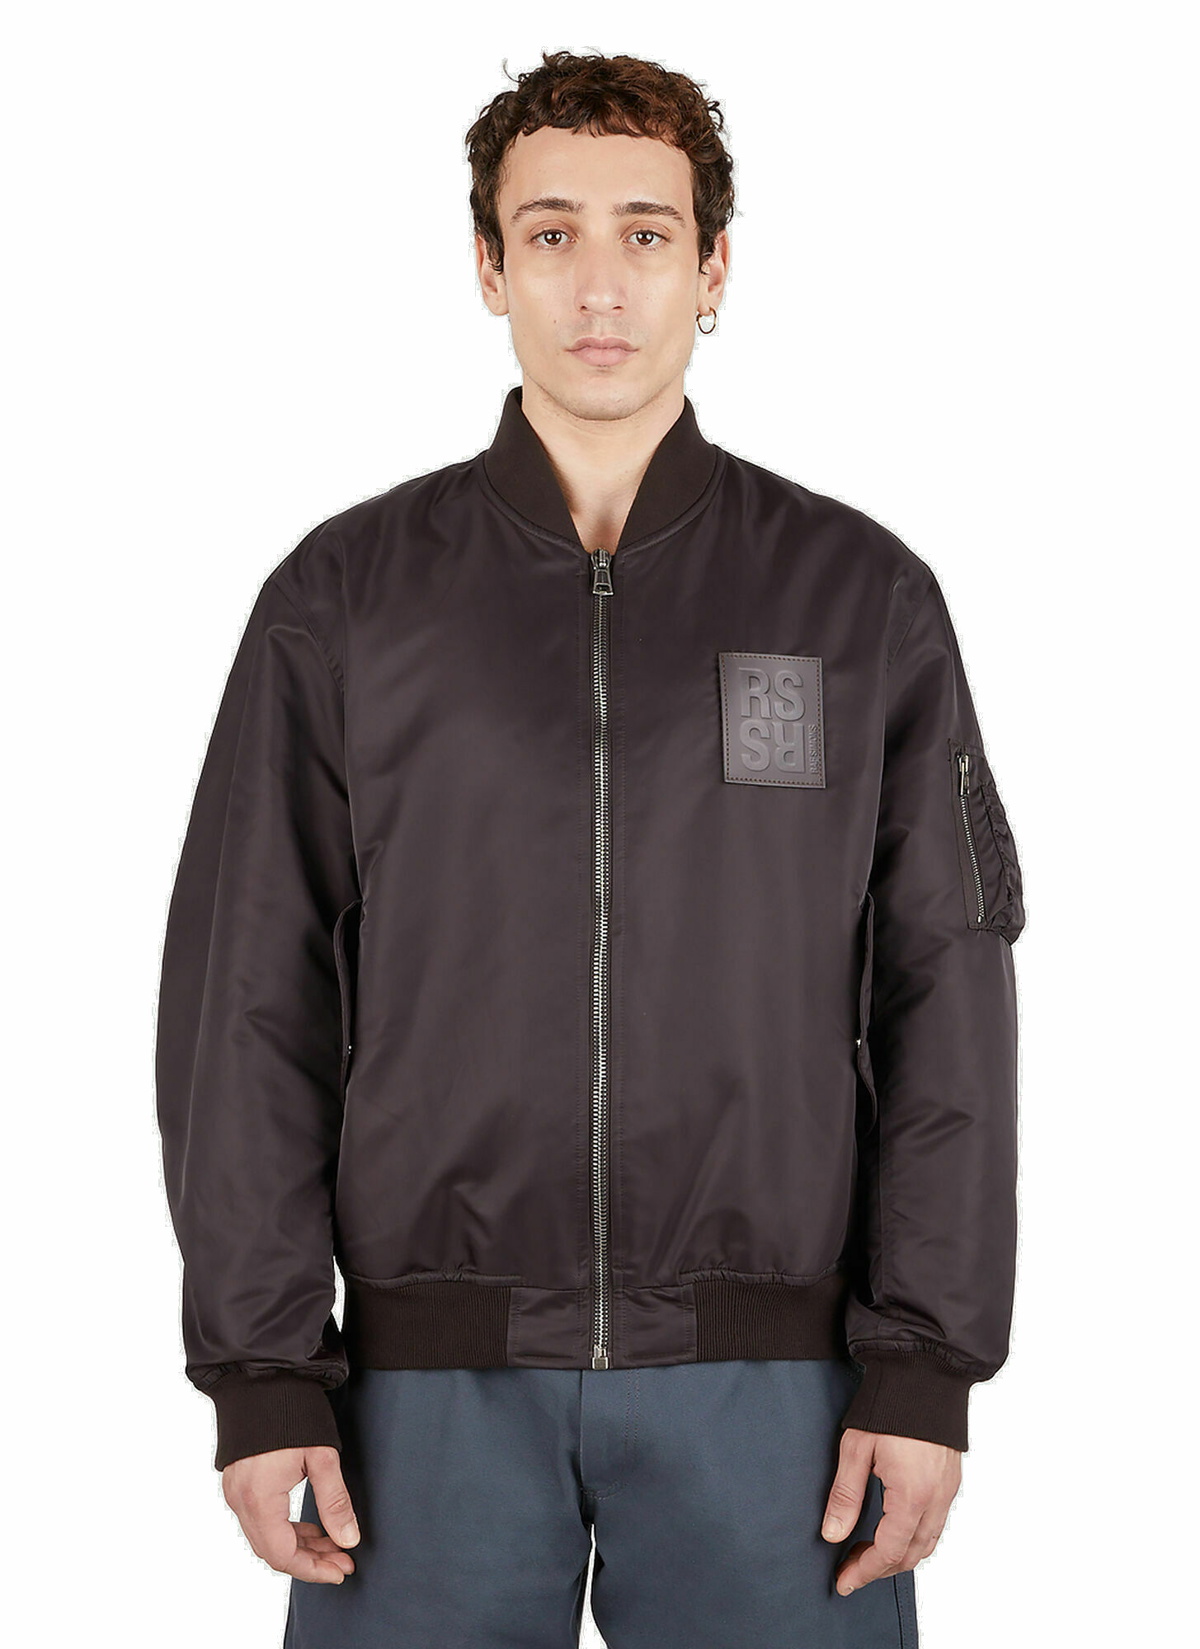 Photo: Raf Simons - Logo Patch Bomber Jacket in Brown